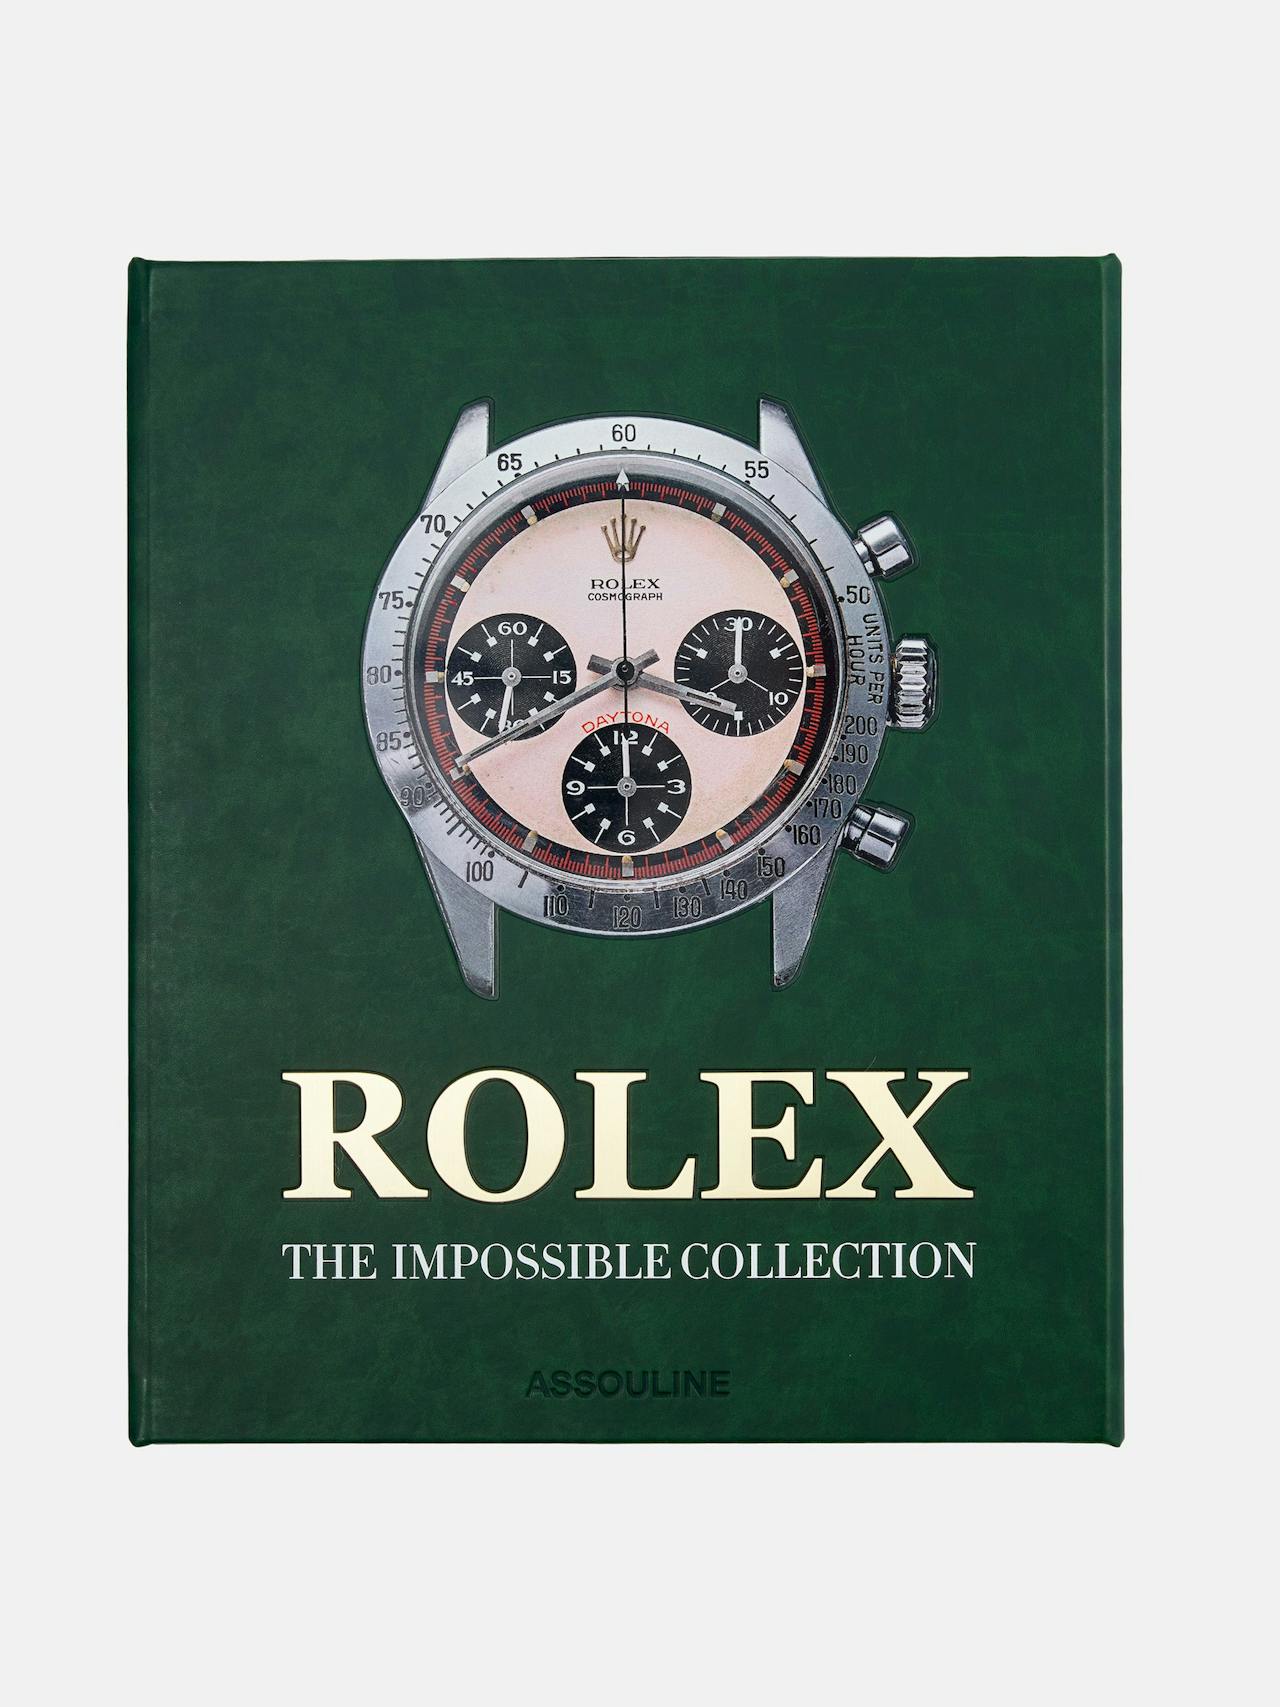 Rolex: The Impossible Collection (2nd Edition) book